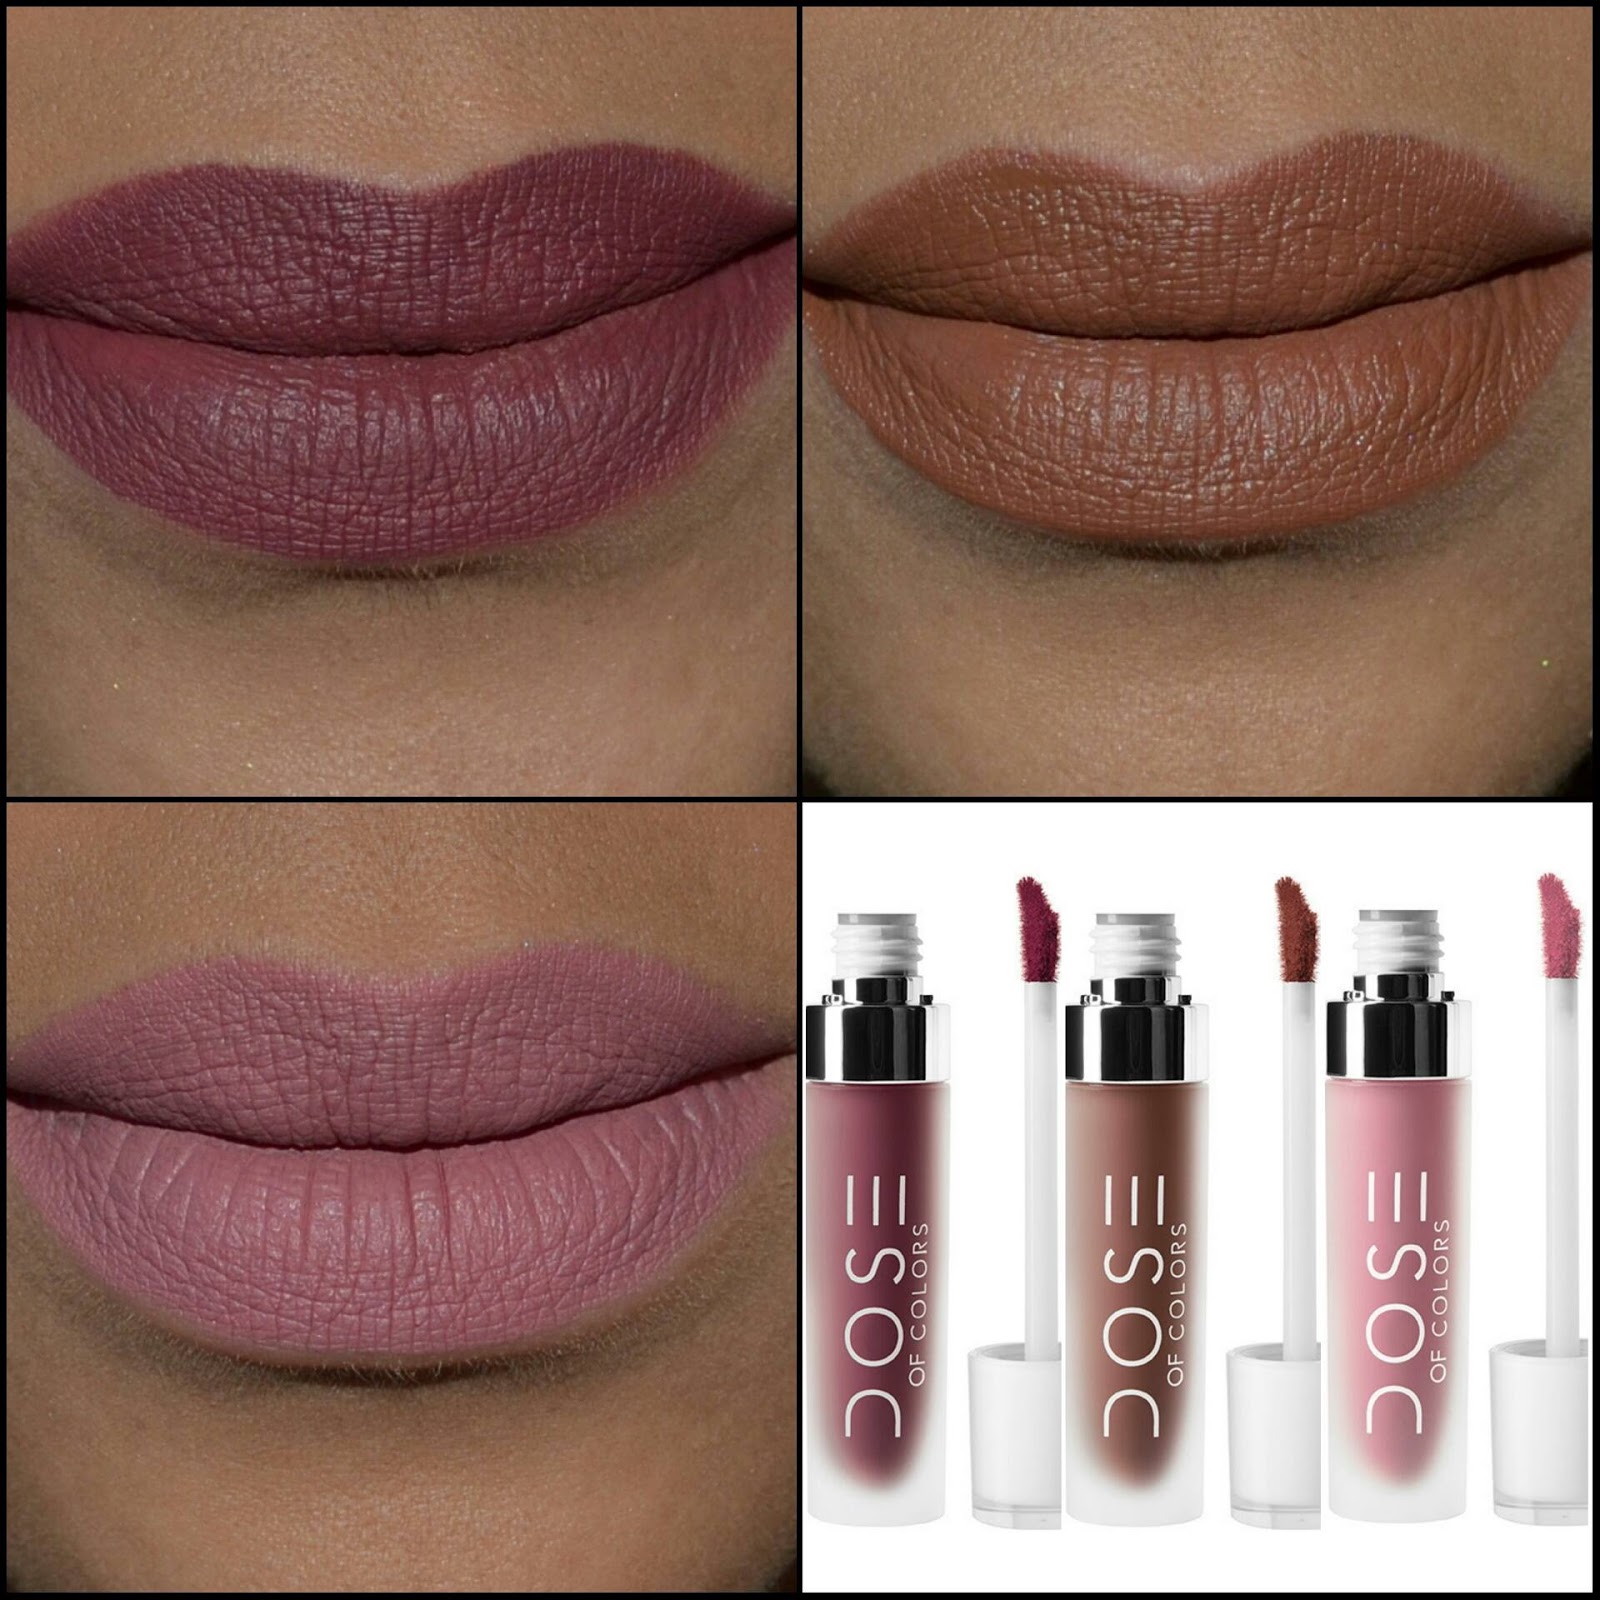 Shetland Verdorren climax Dose of Colors Liquid Lipstick Review and Swatches | The Glam Mom